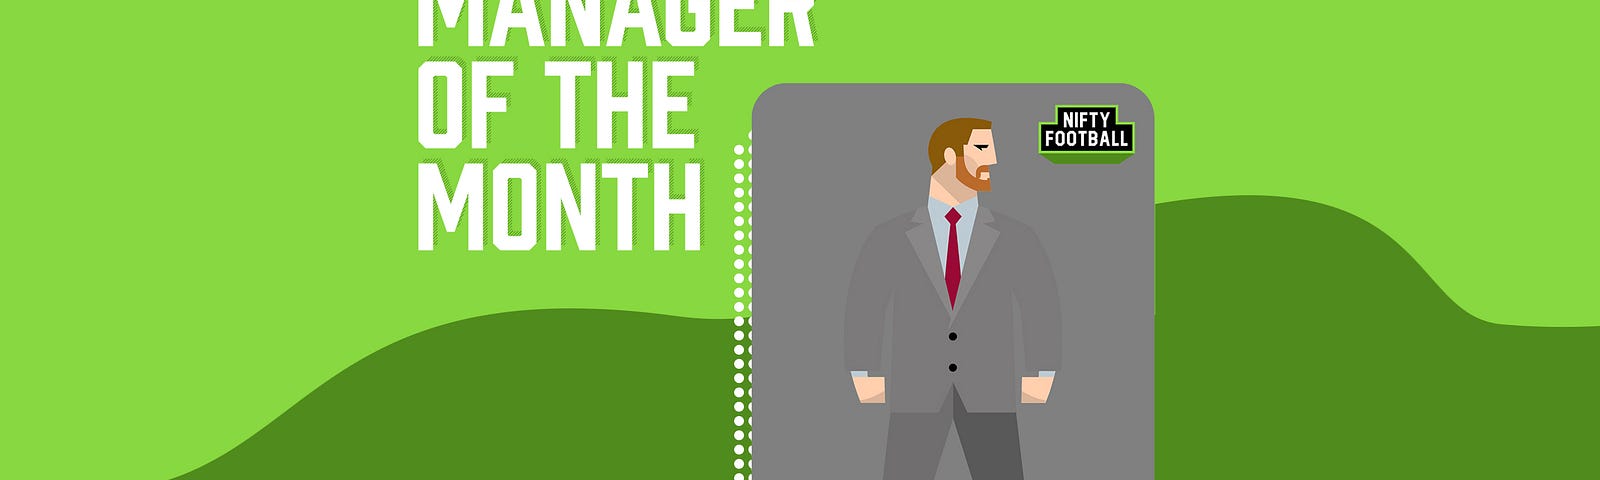 Manager of the month — pnvc